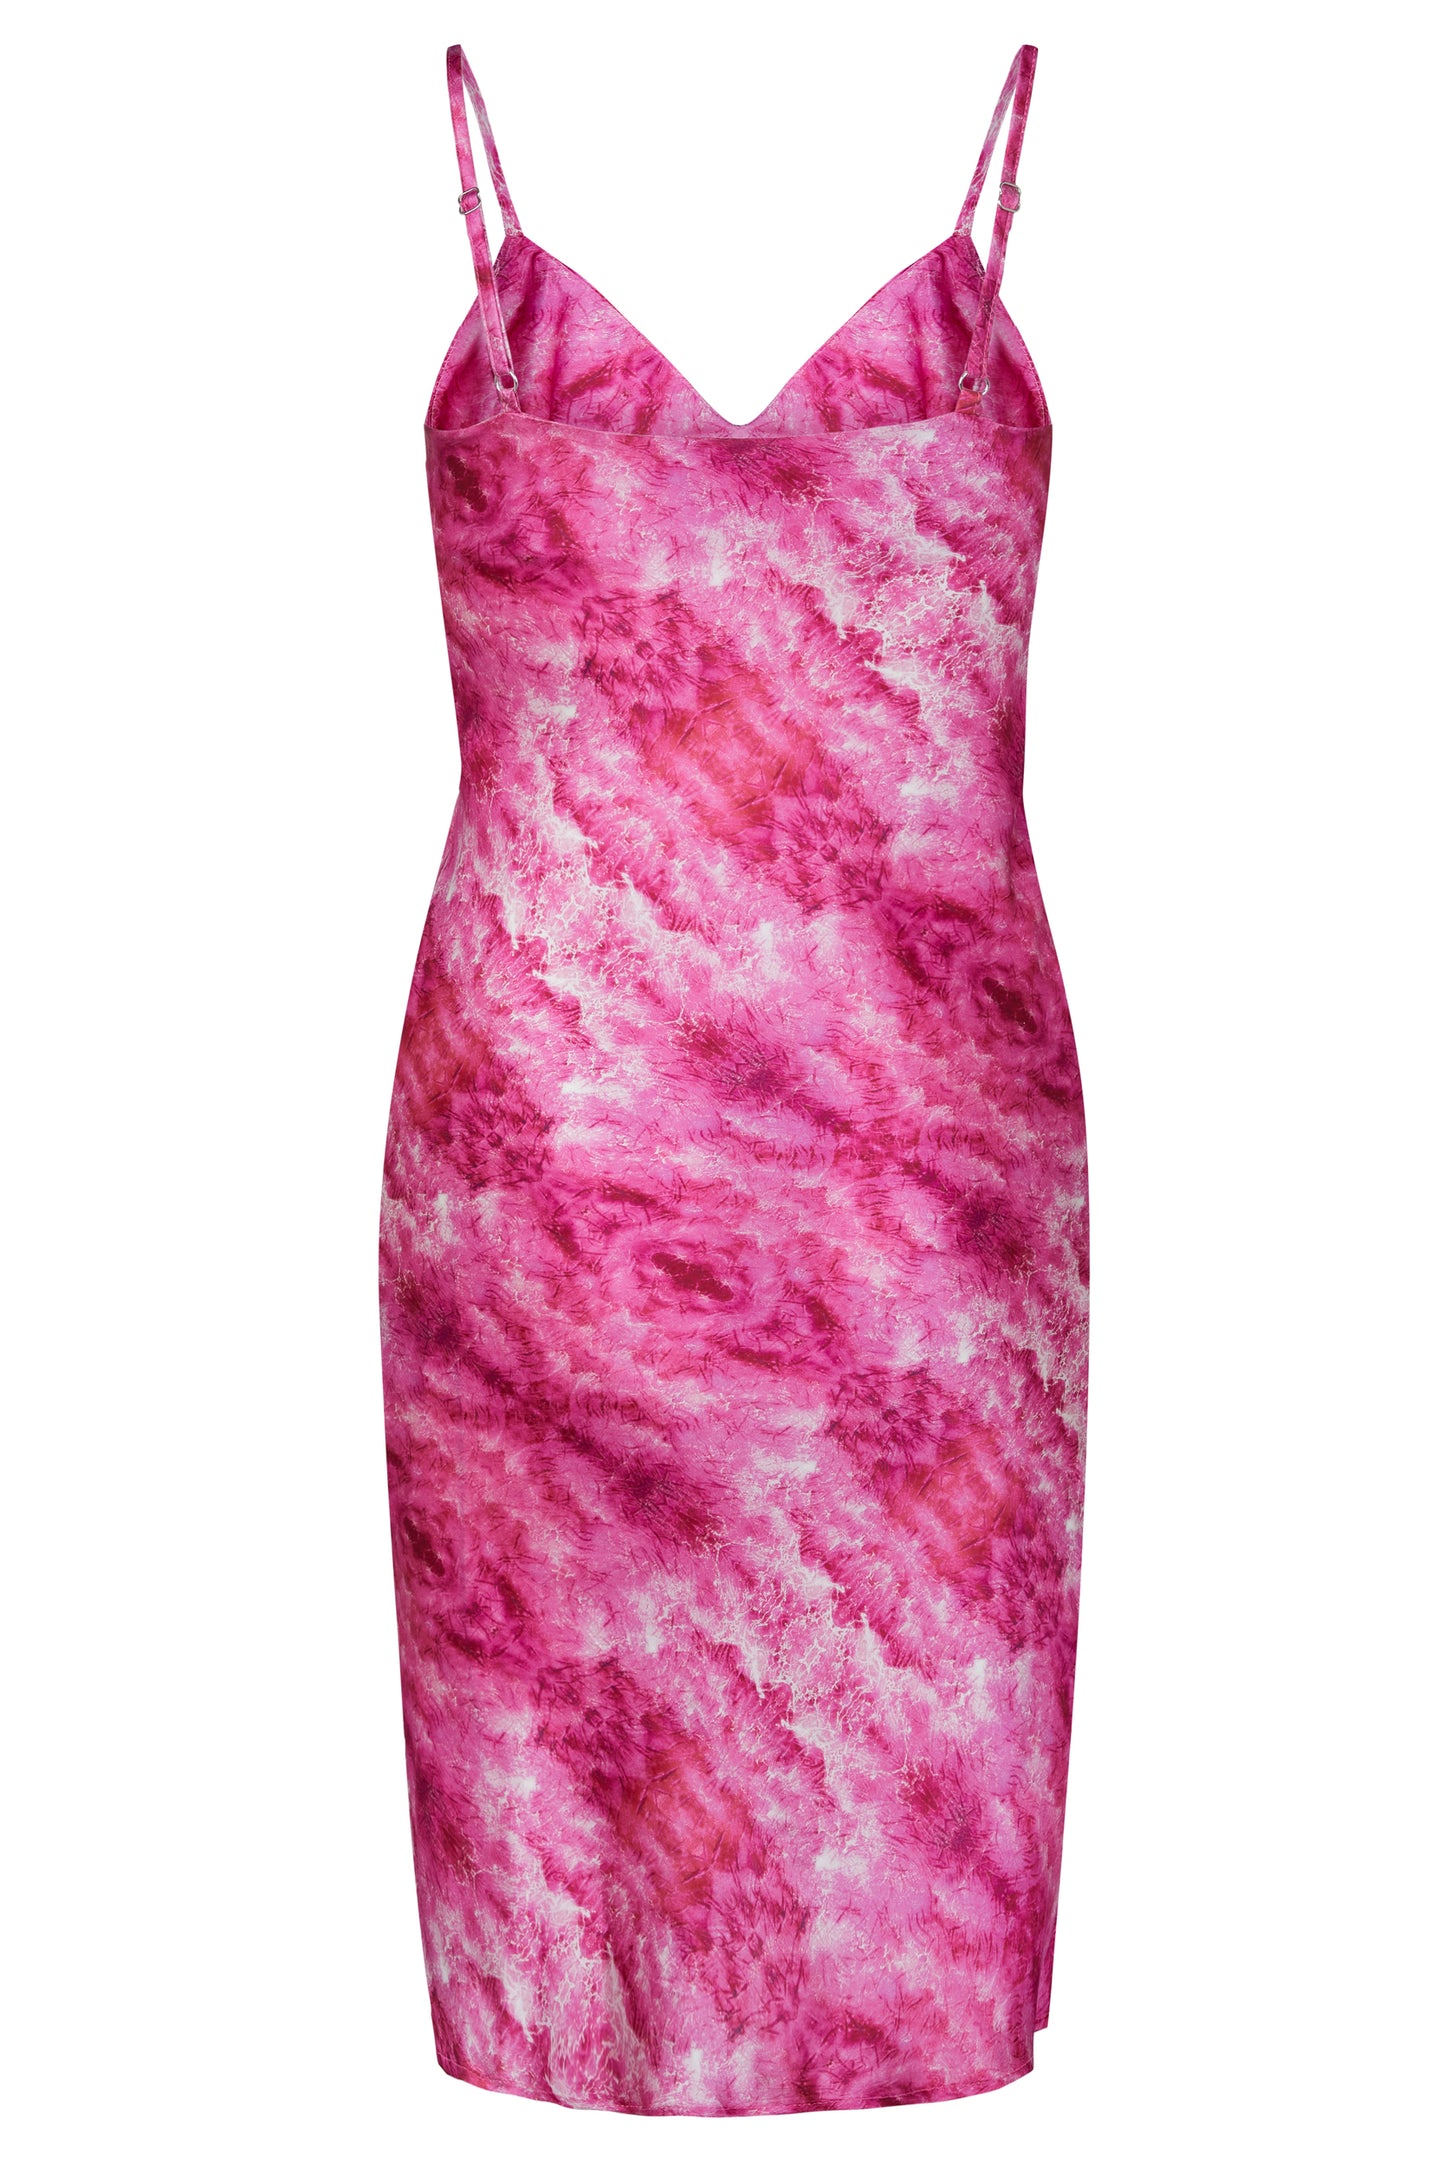 PINK BRIGHT - Mid-length dress in 100% silk